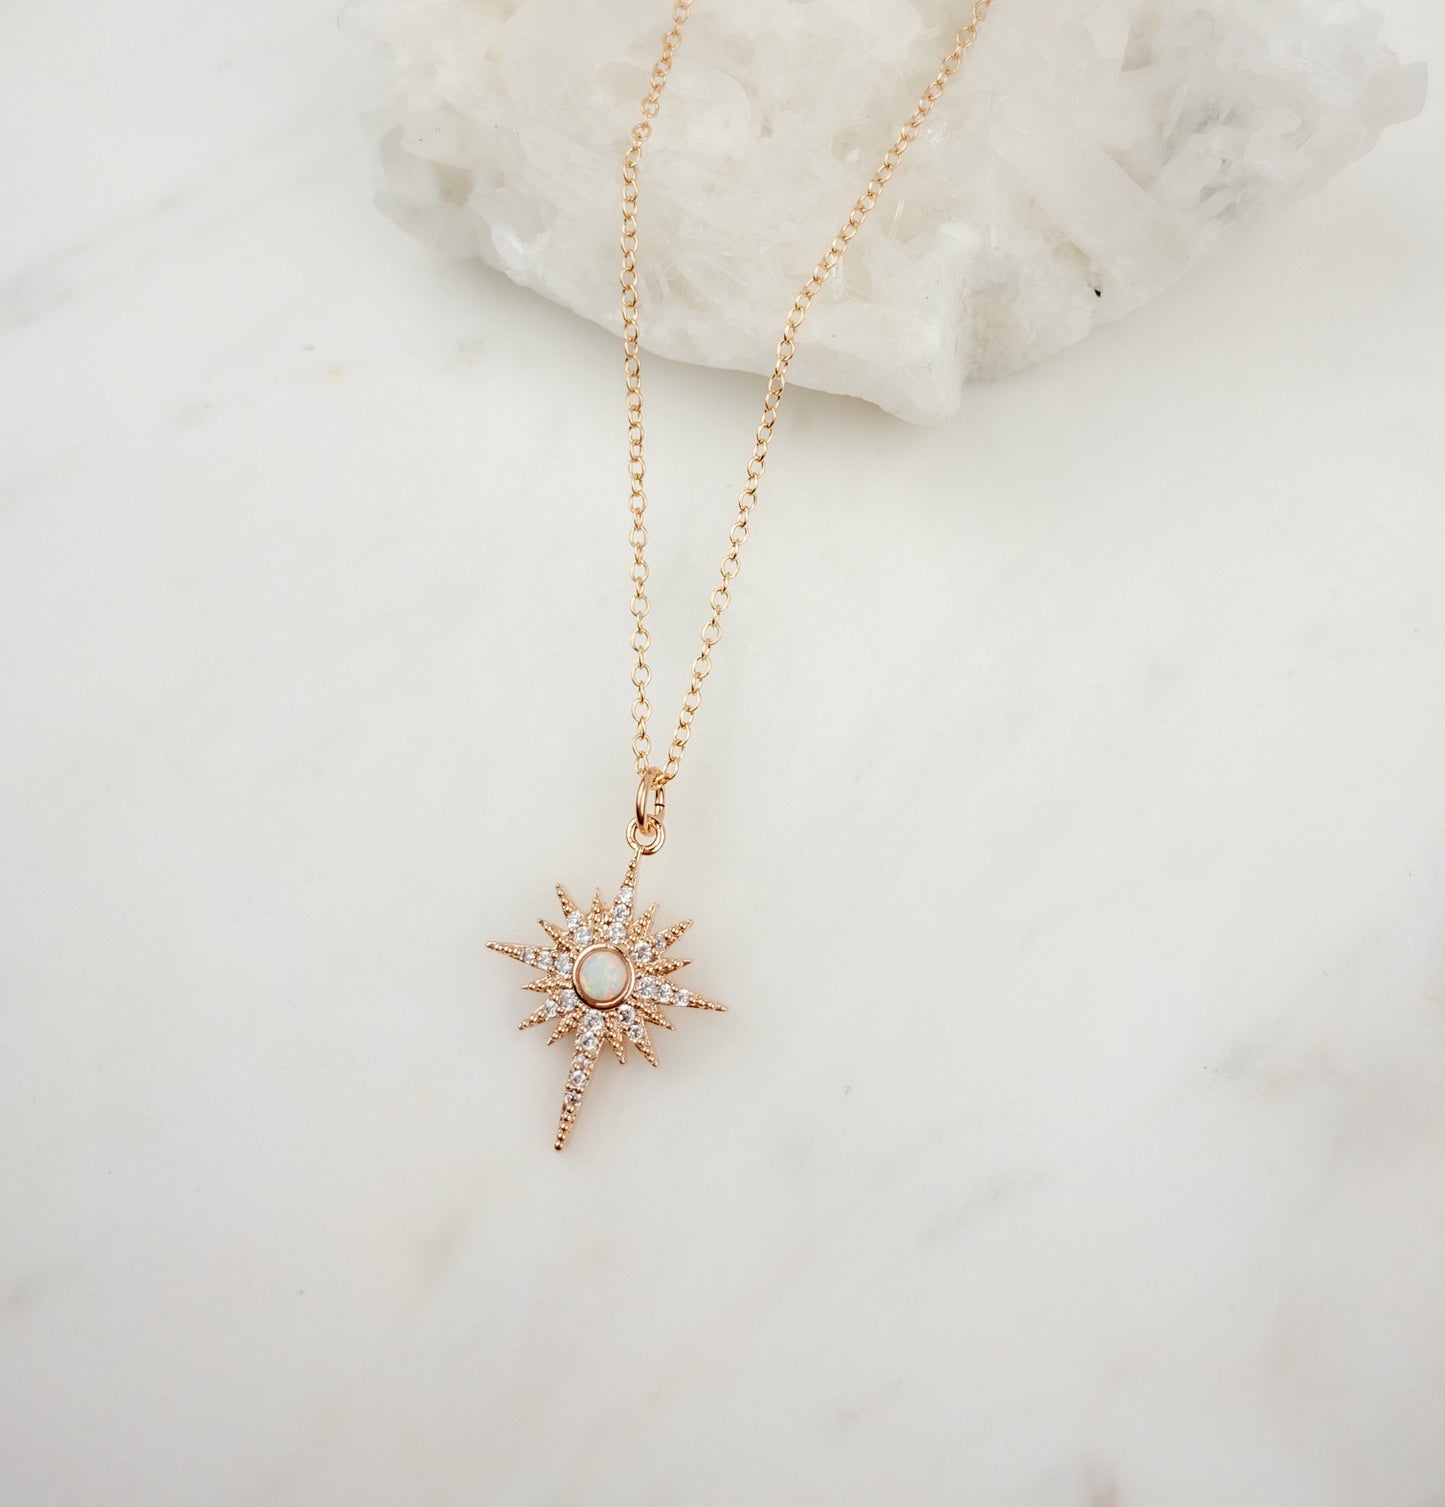 Rose gold opal star necklace